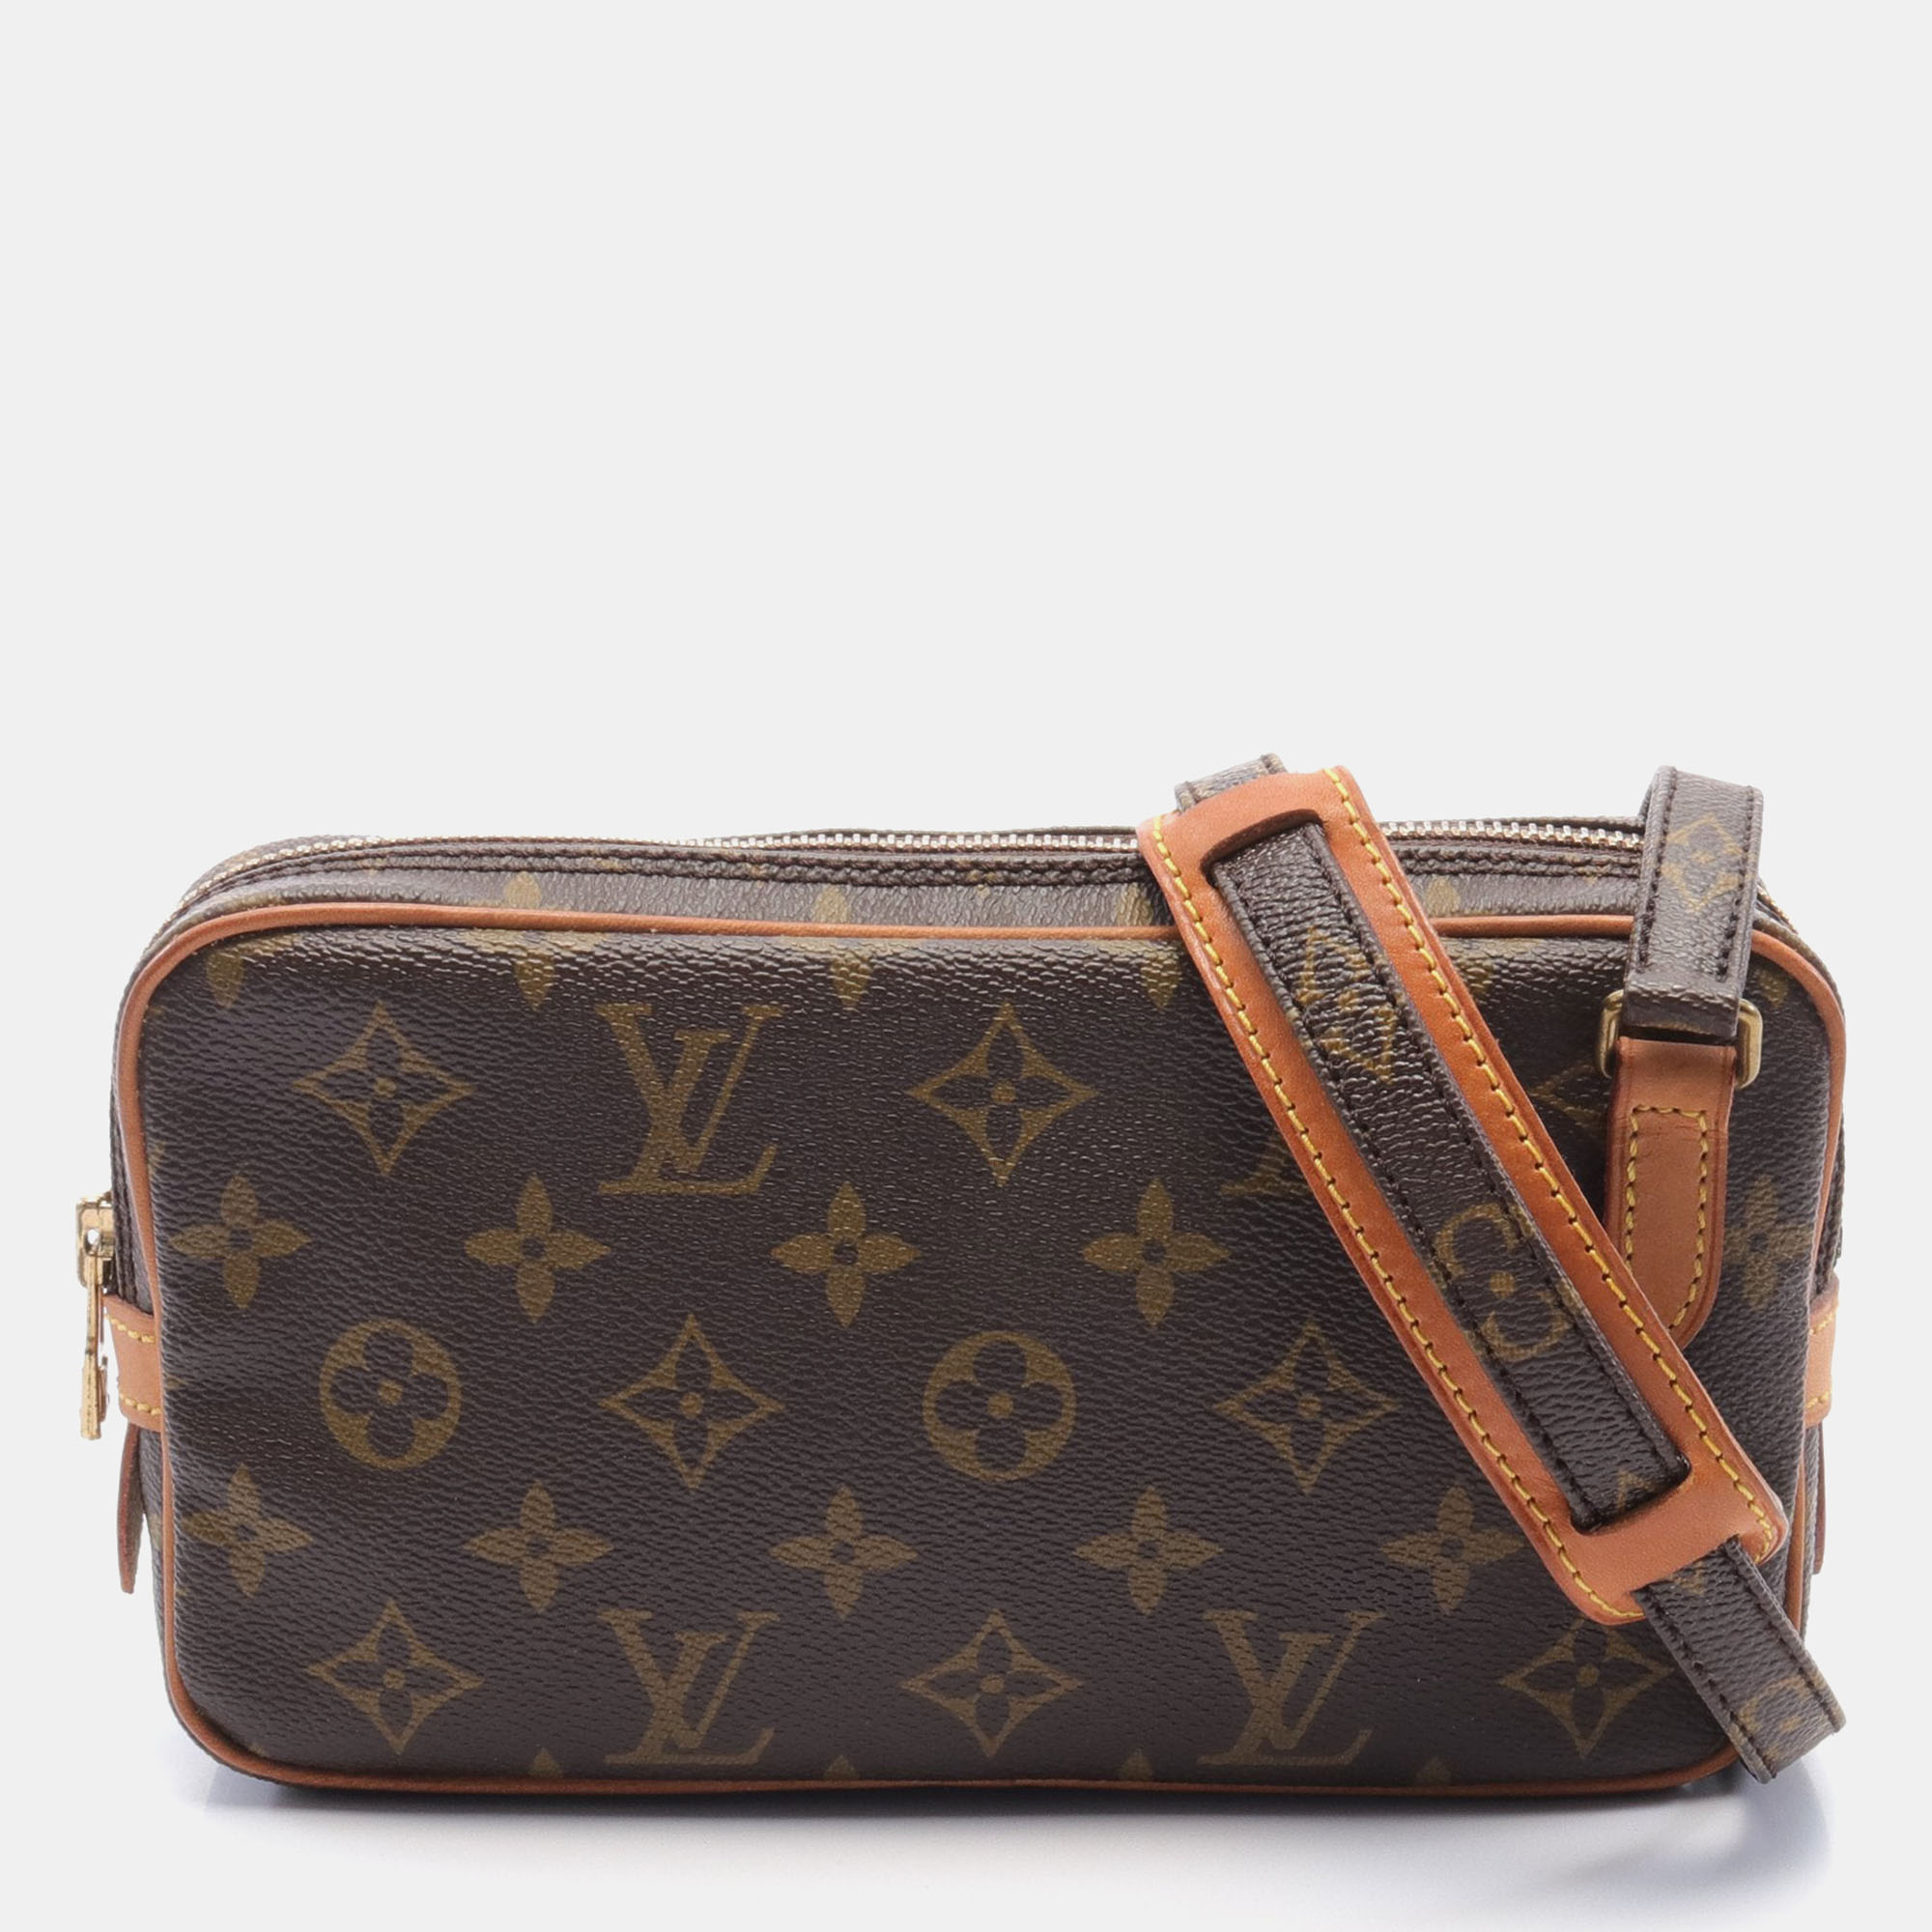 Pre-owned Louis Vuitton Marly Bandouliere Monogram Shoulder Bag Pvc Leather Brown